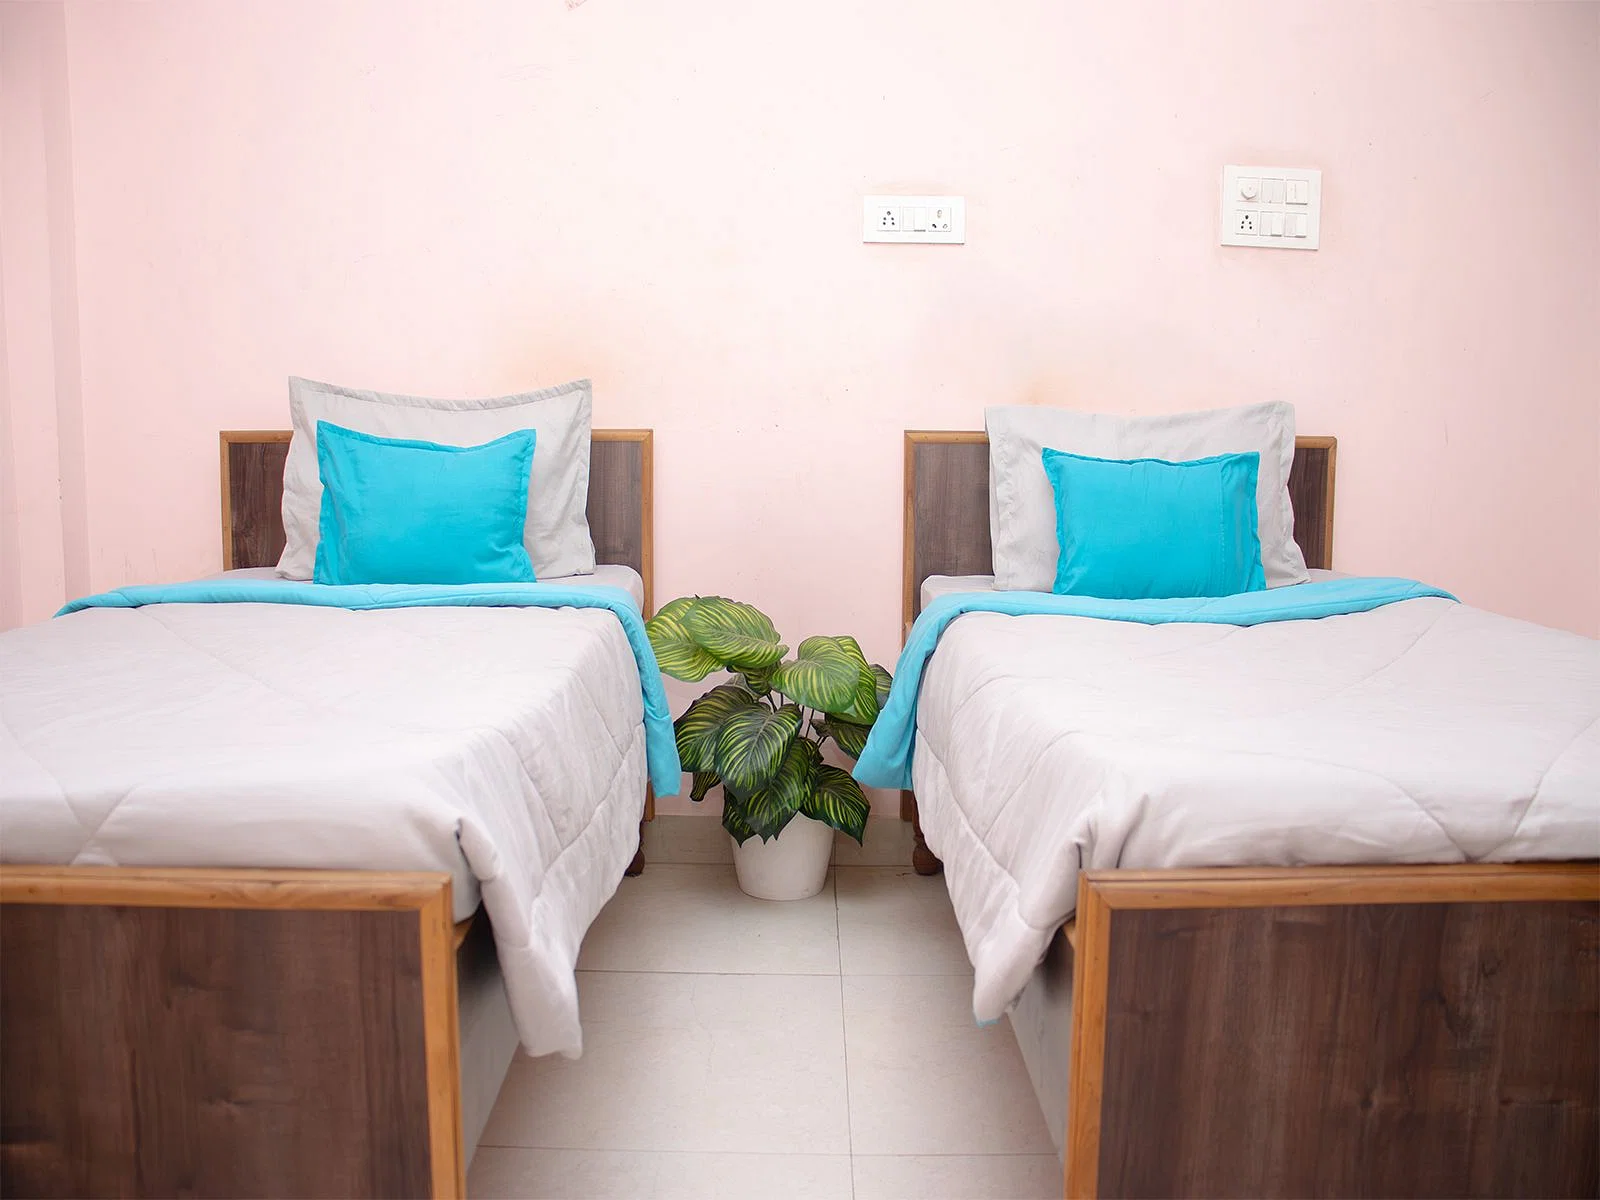 budget-friendly PGs and hostels for unisex with single rooms with daily hopusekeeping-Zolo Aloha